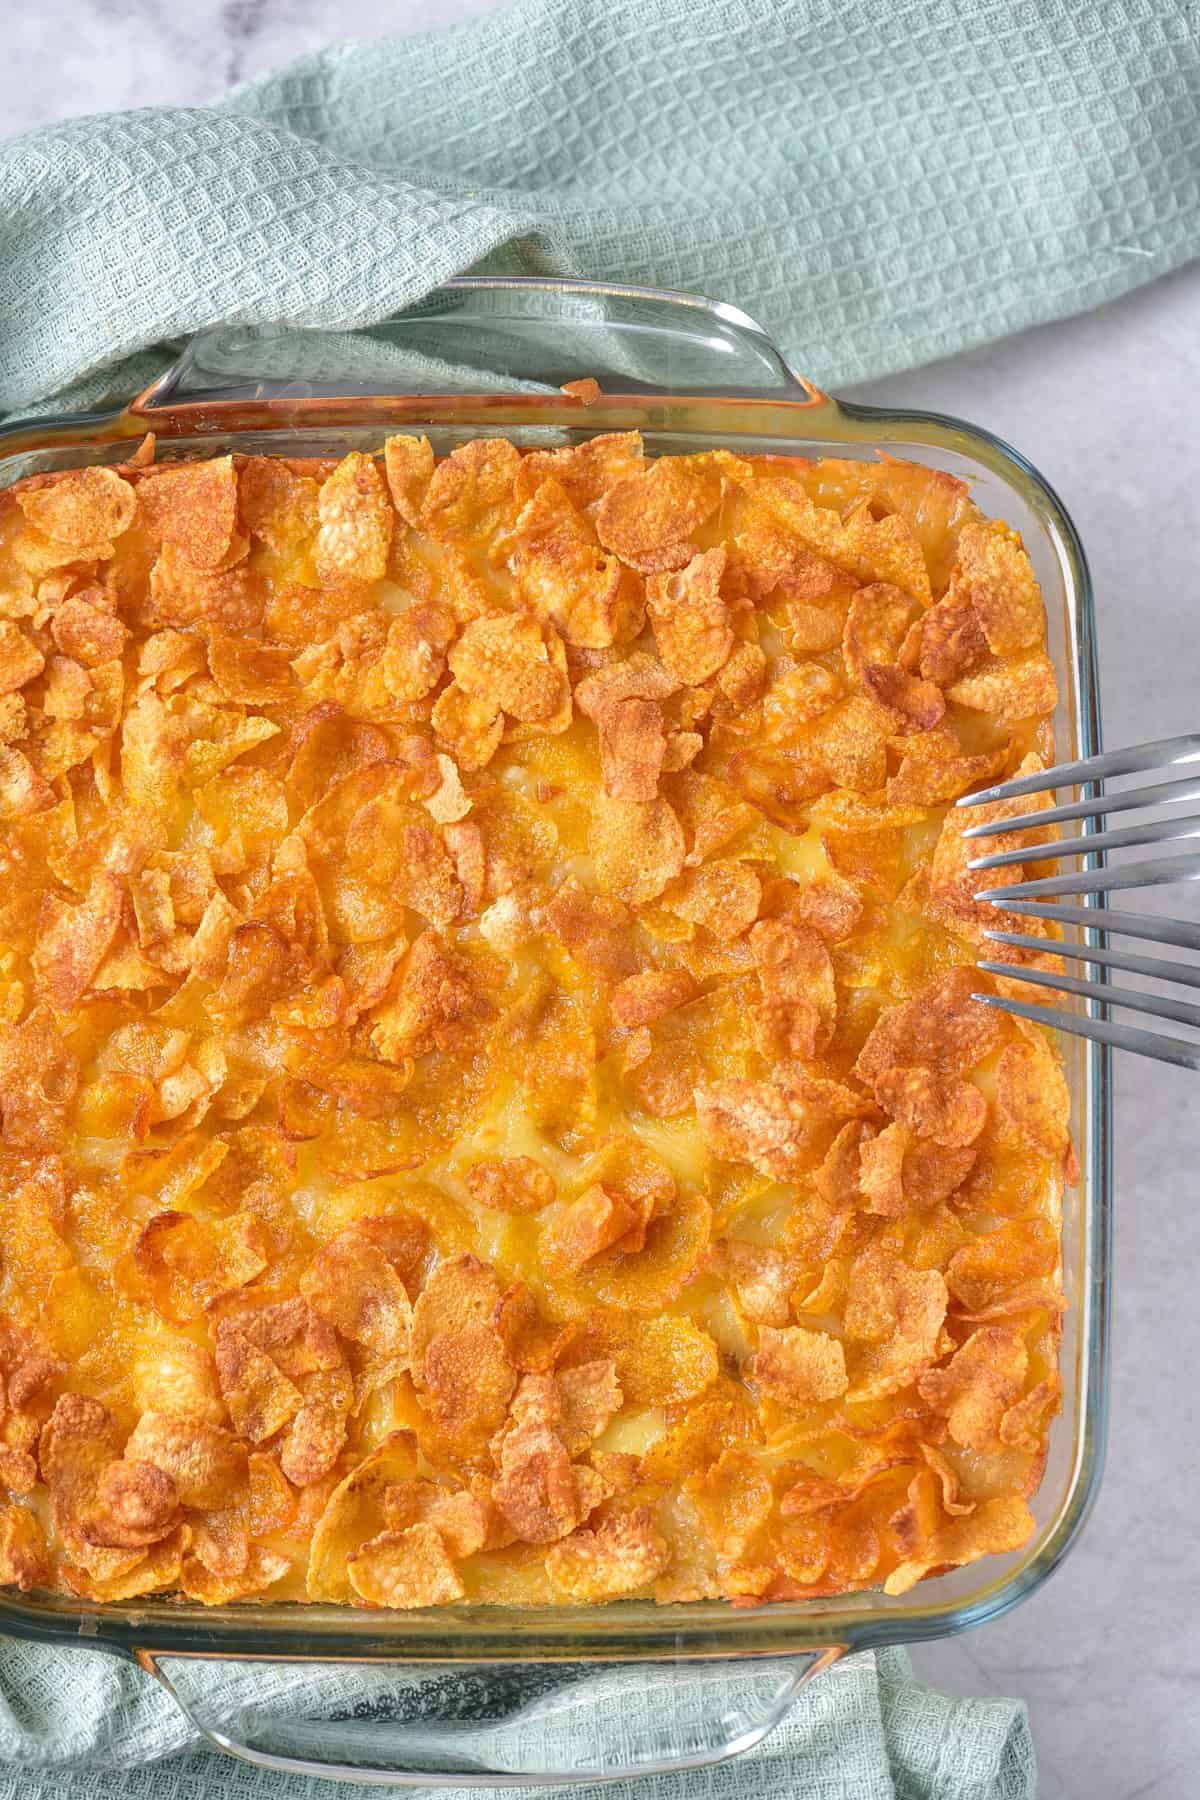 Cooked hashbrown breakfast casserole on a table with a napkin and forks.